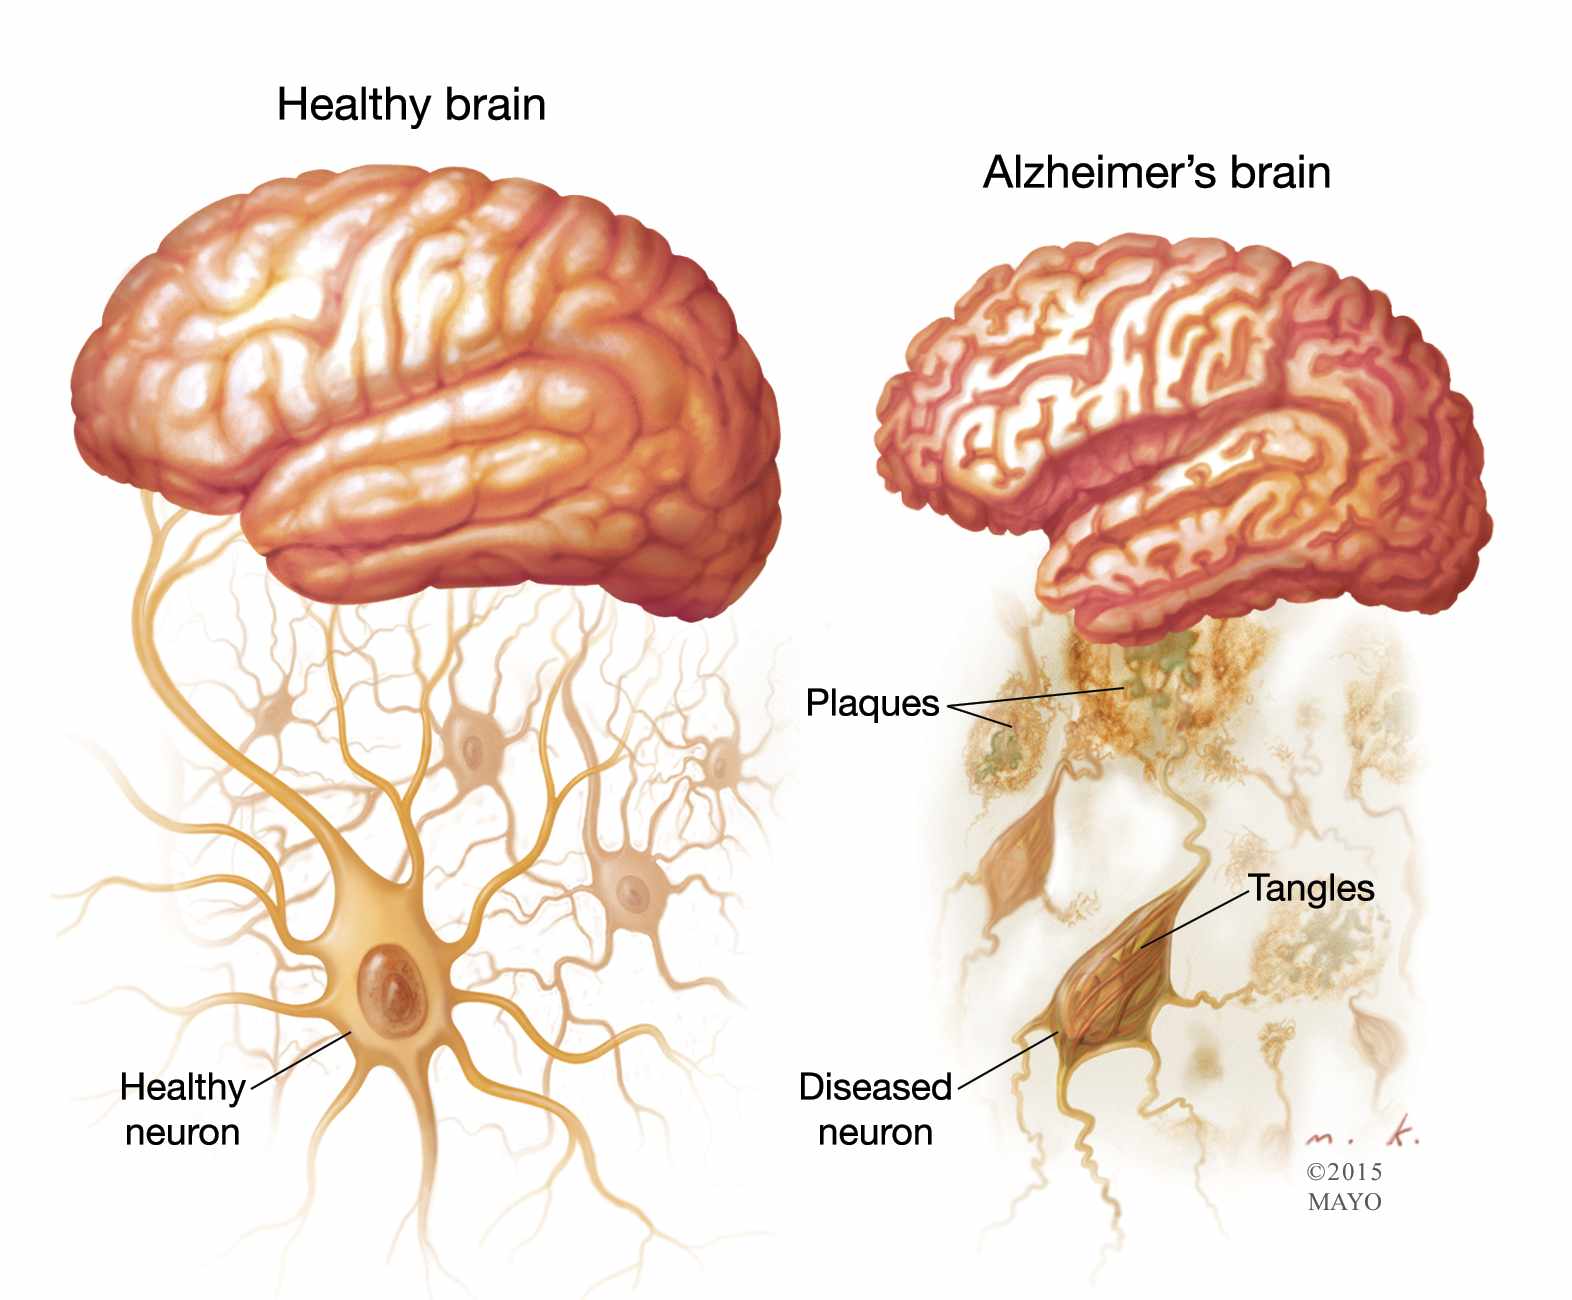 illustration of healthy brain and one with Alzheimer's